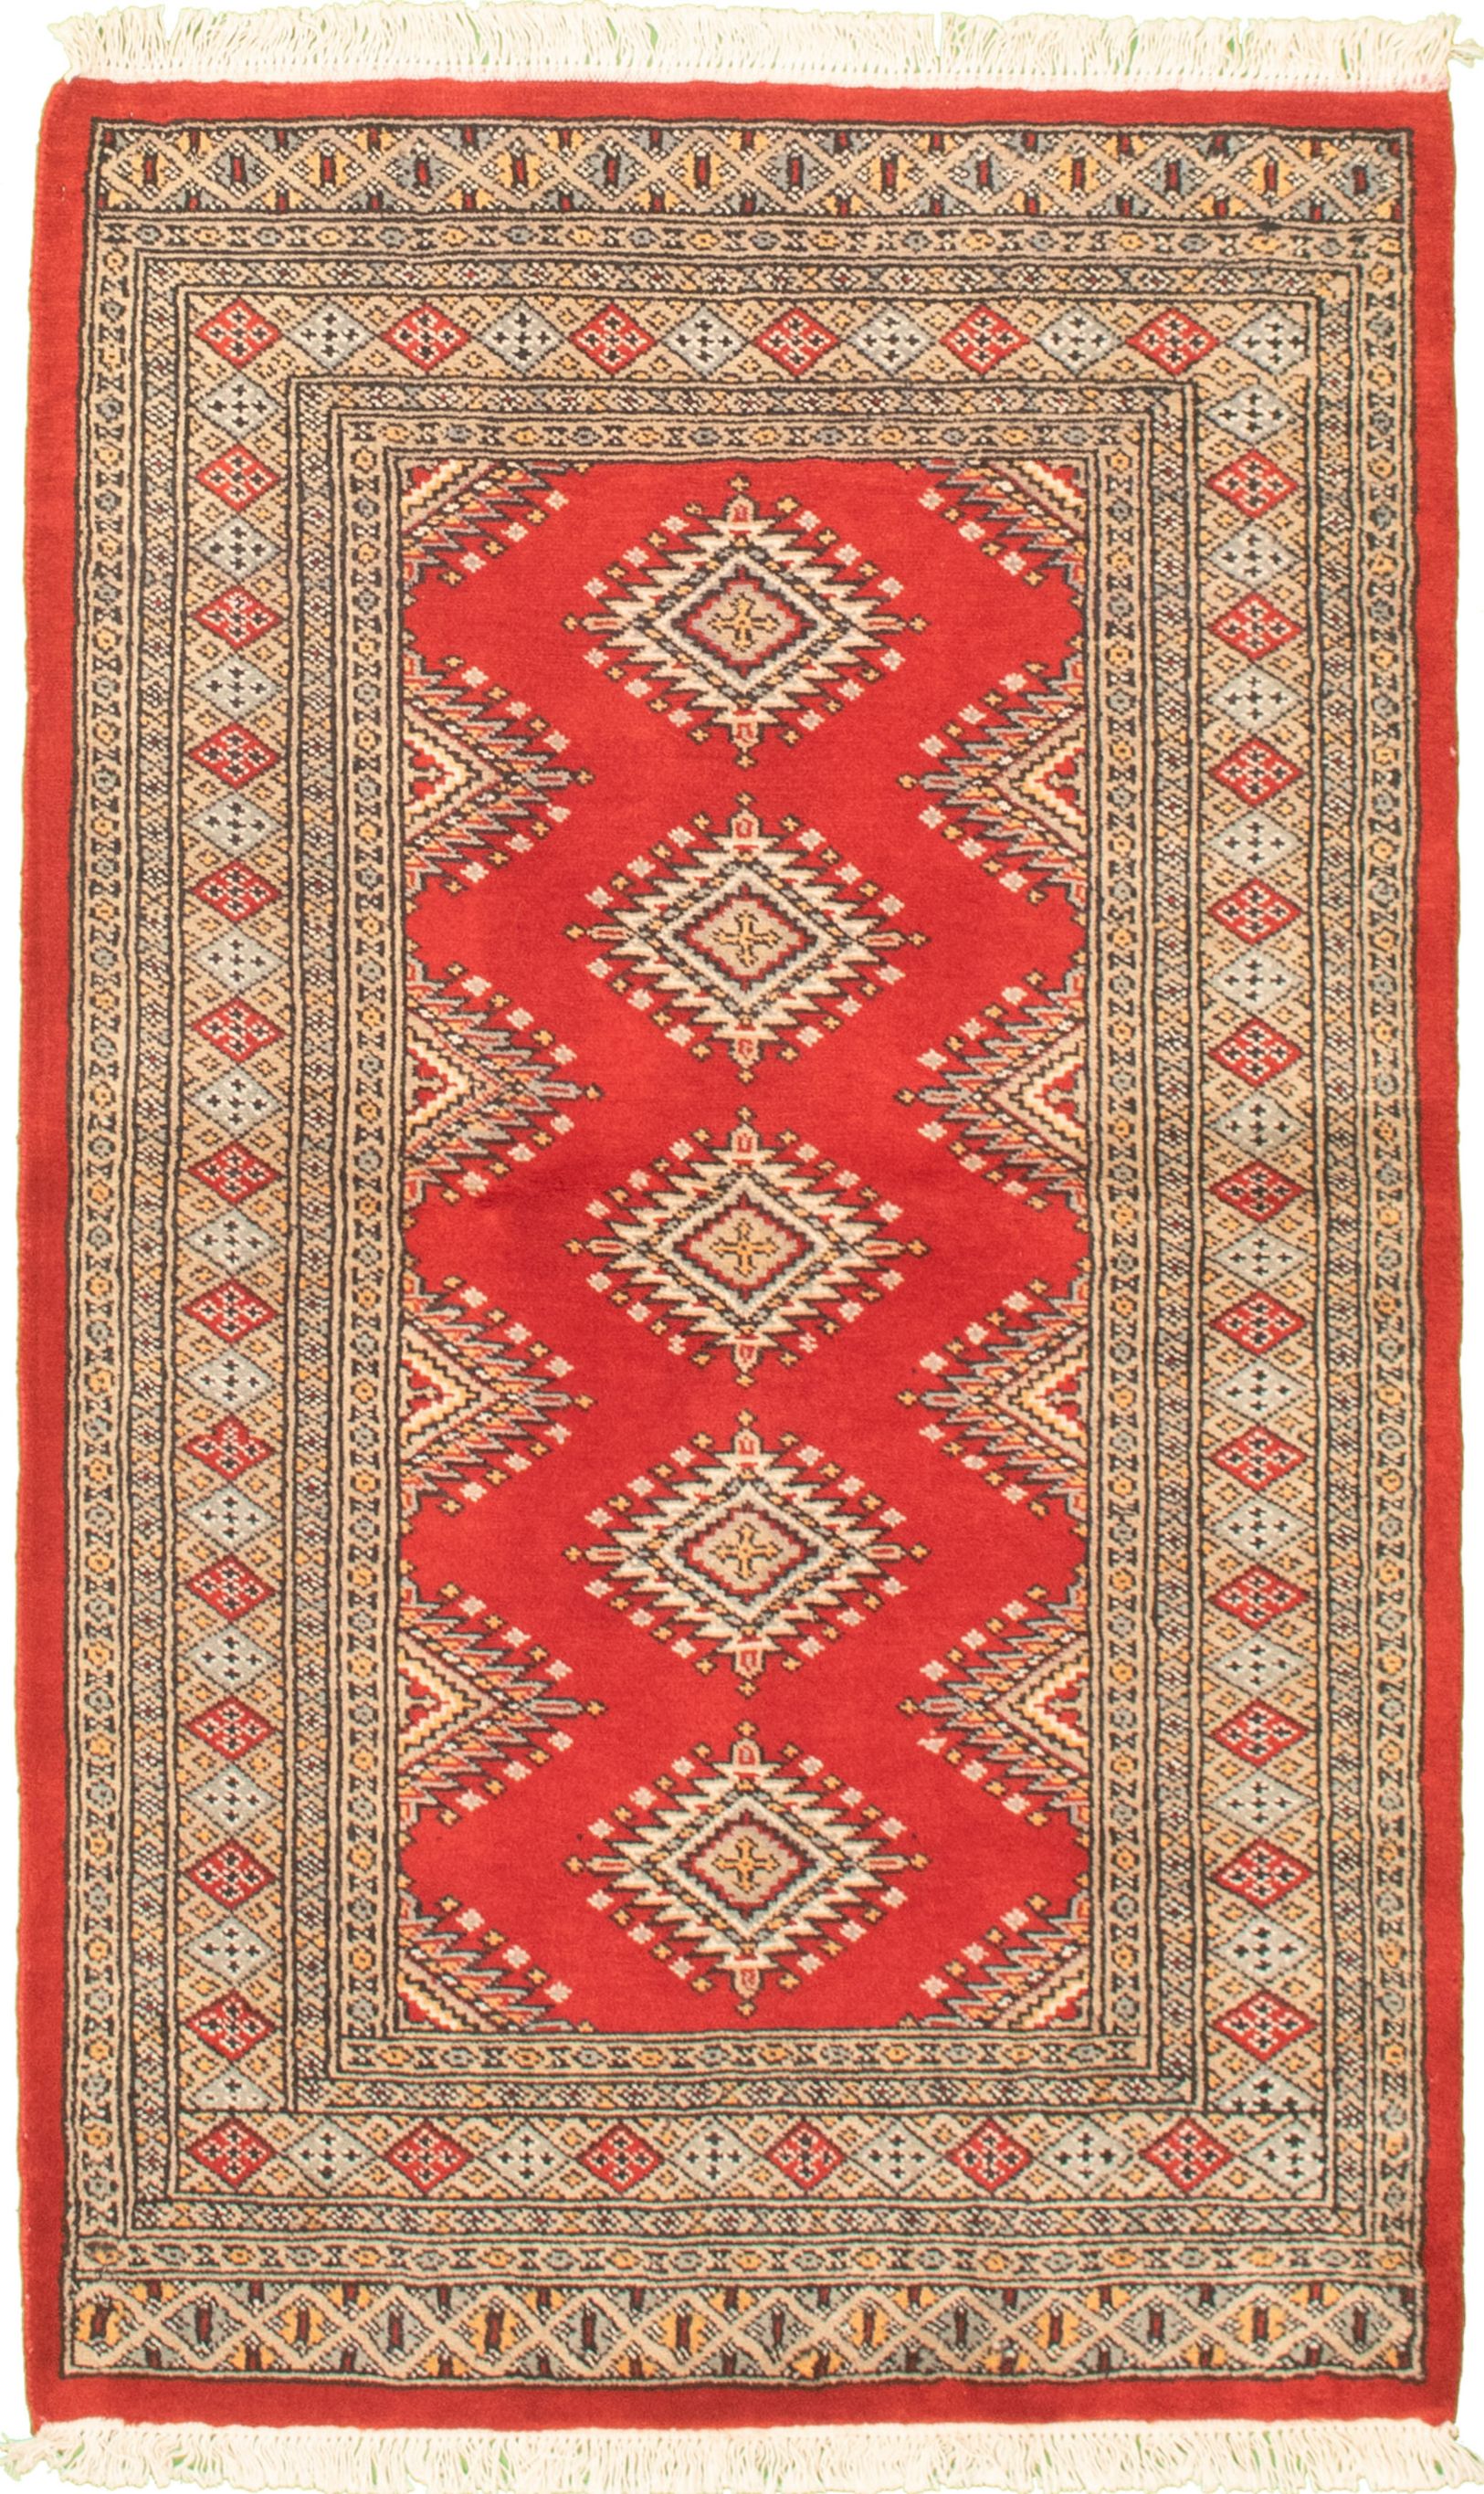 Hand-knotted Finest Peshawar Bokhara Red Wool Rug 3'1" x 5'3"  Size: 3'1" x 5'3"  